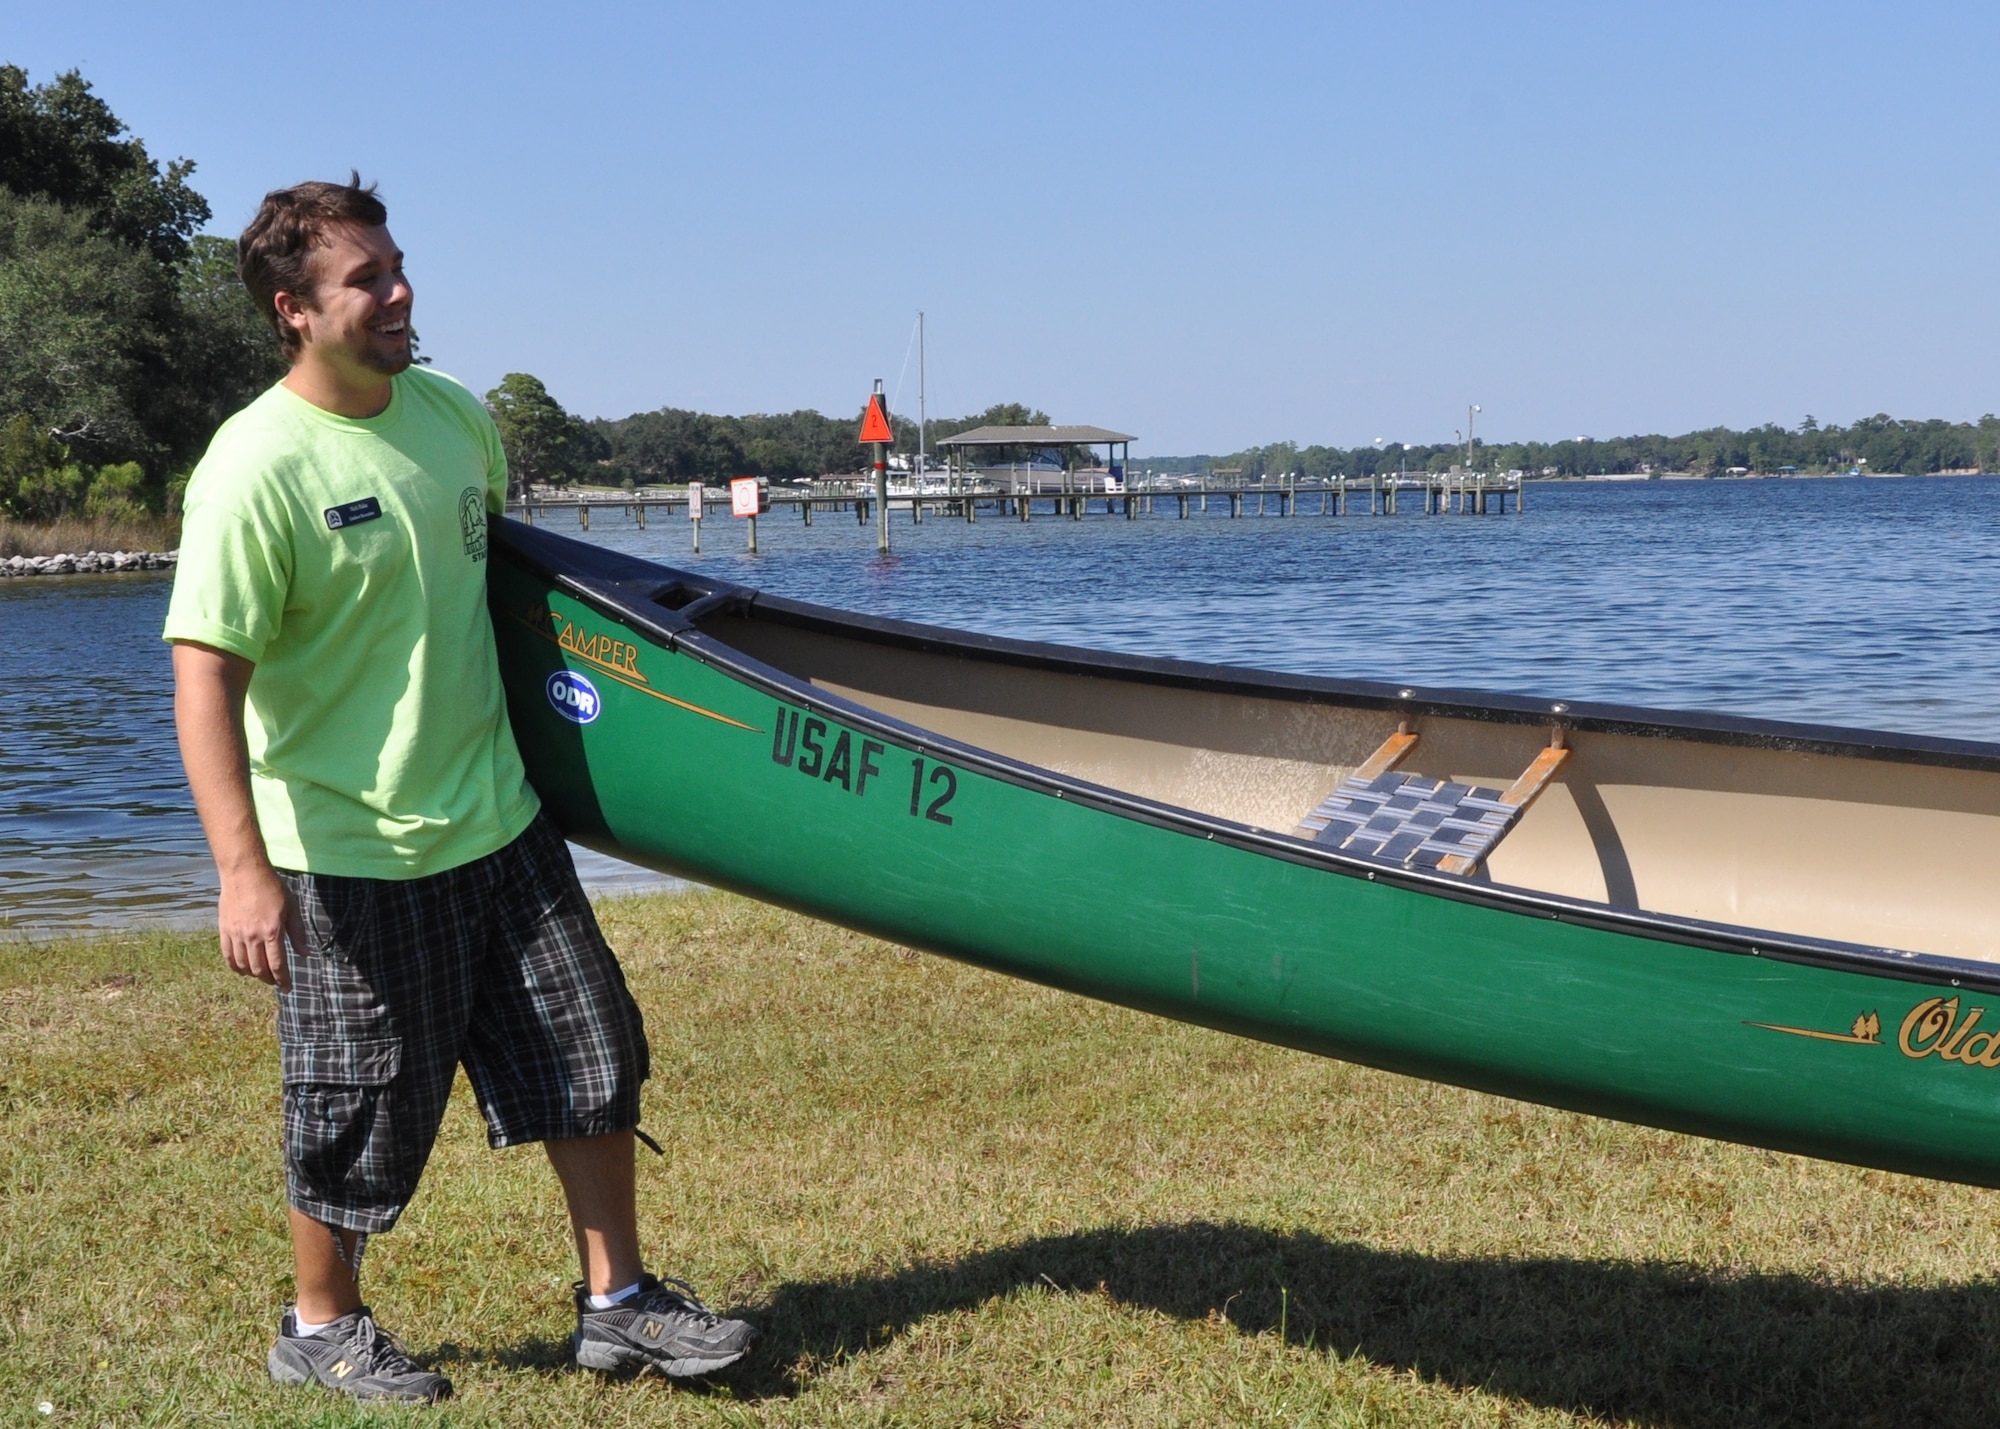 Nick Halas, recreation assistant, helps carry a canoe back to its resting place at Eglin’s Outdoor Recreation dock Sept. 29. The facility recently started moonlight paddle tours as something new to offer customers this fall. (U.S. Air Force photo/Chrissy Cuttita)